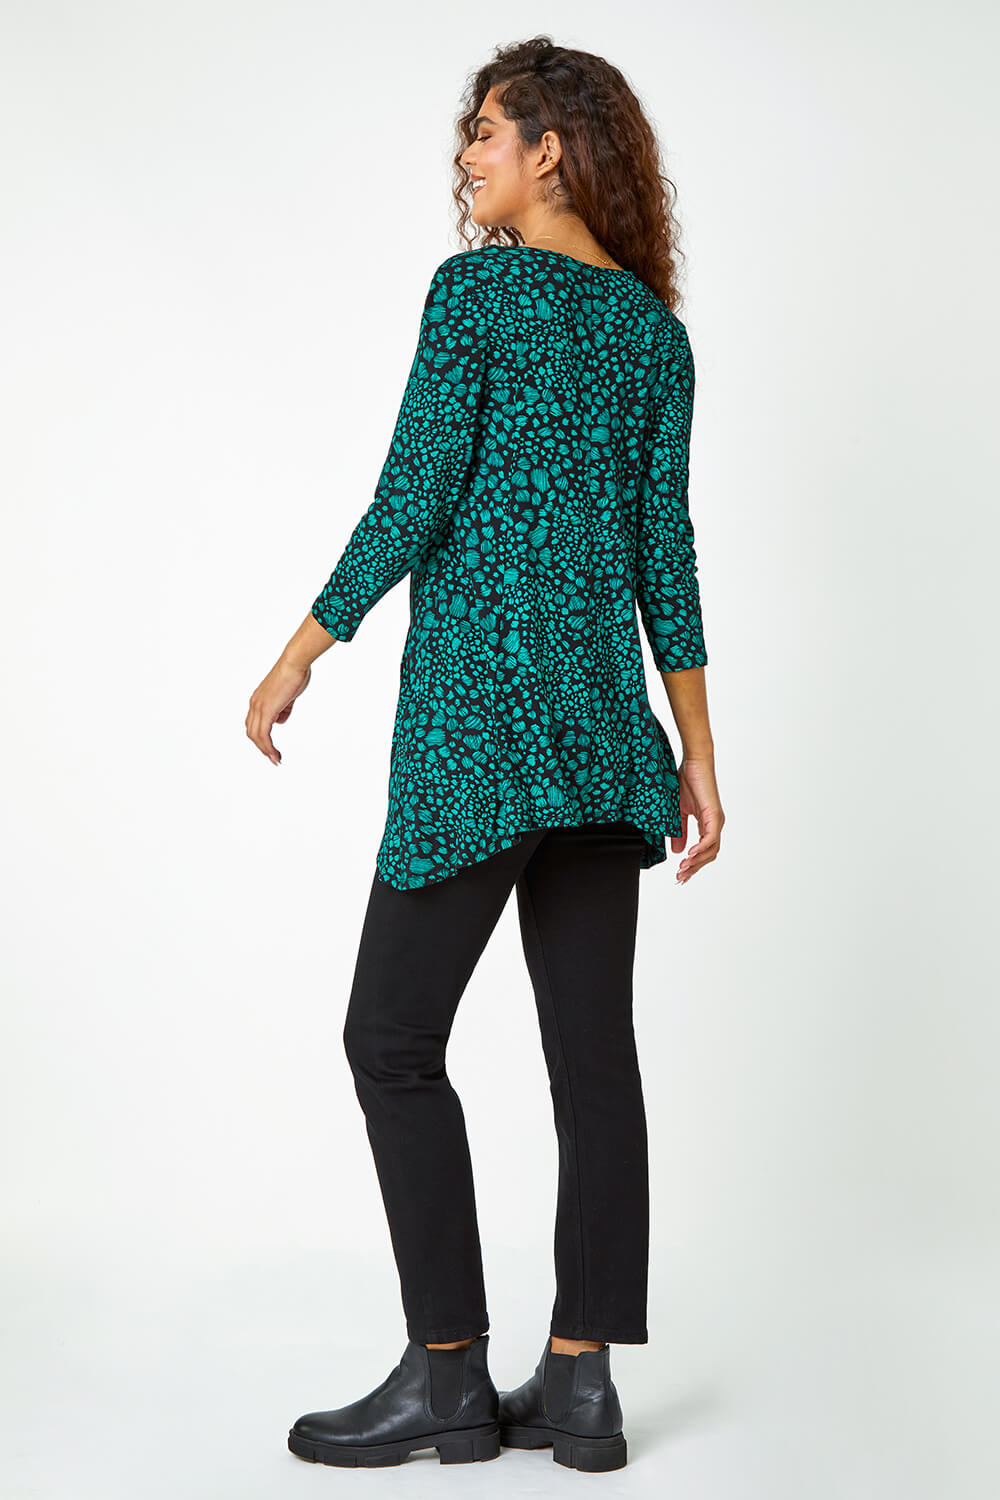 Green Spot Print Swing Stretch Top, Image 3 of 5